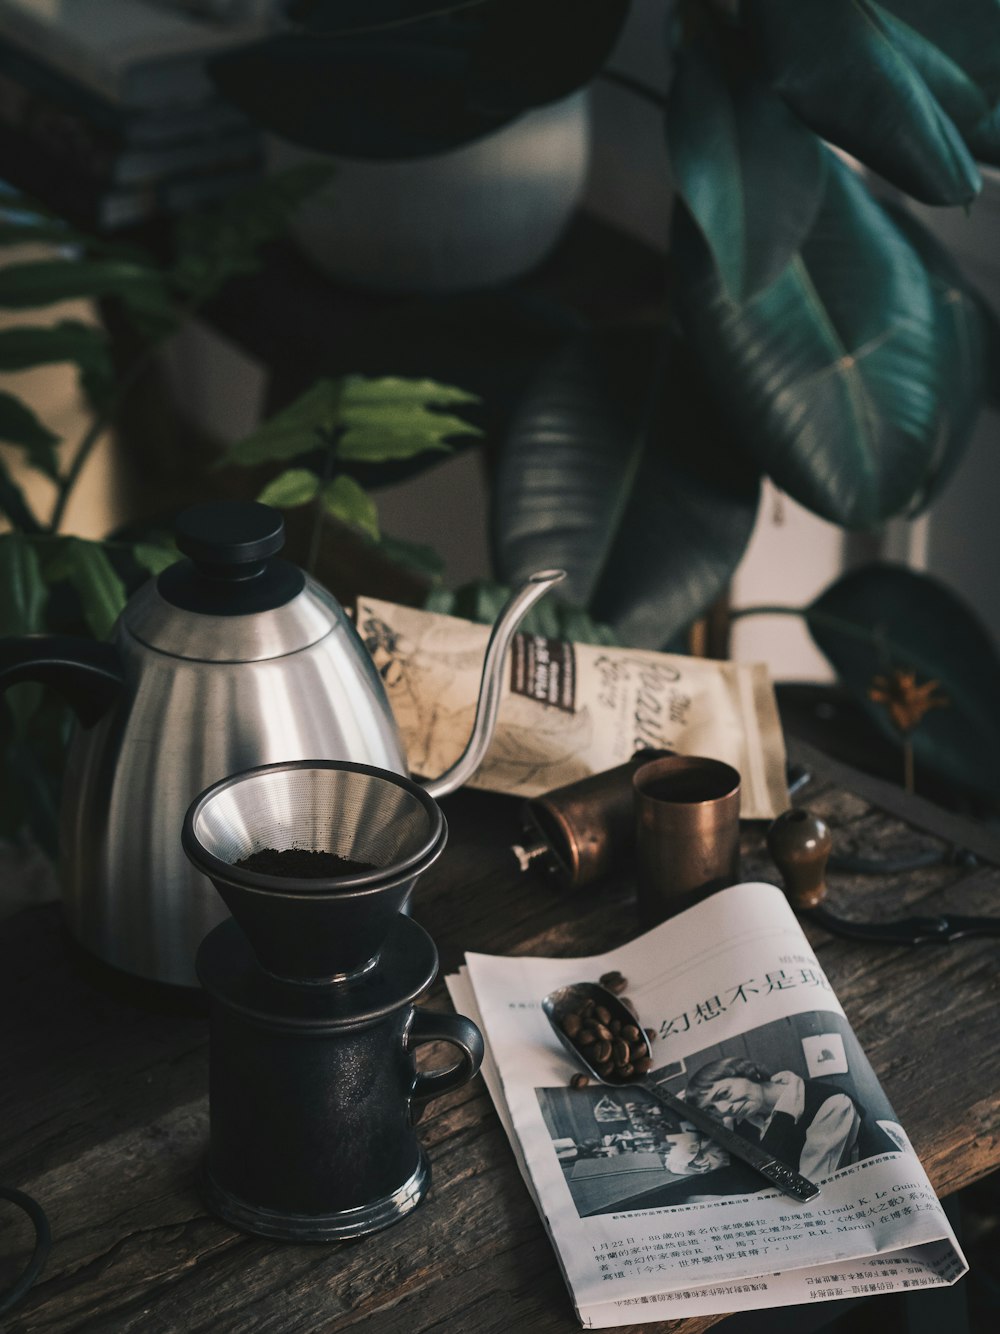 black coffee grinder beside gray stainless steel teapot near green rubber plant